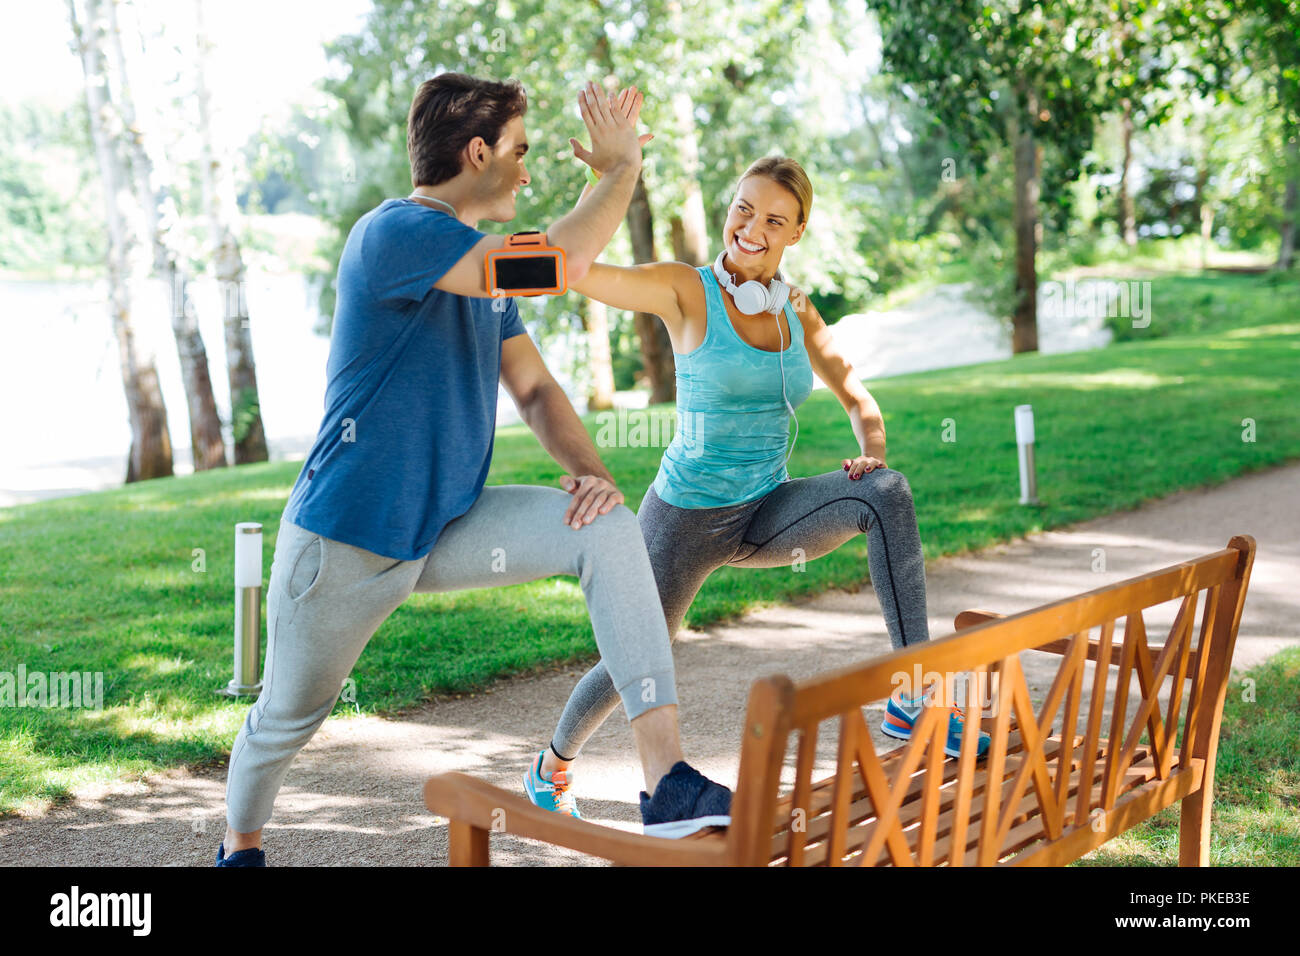 Delighted happy young people doing sports together Stock Photo